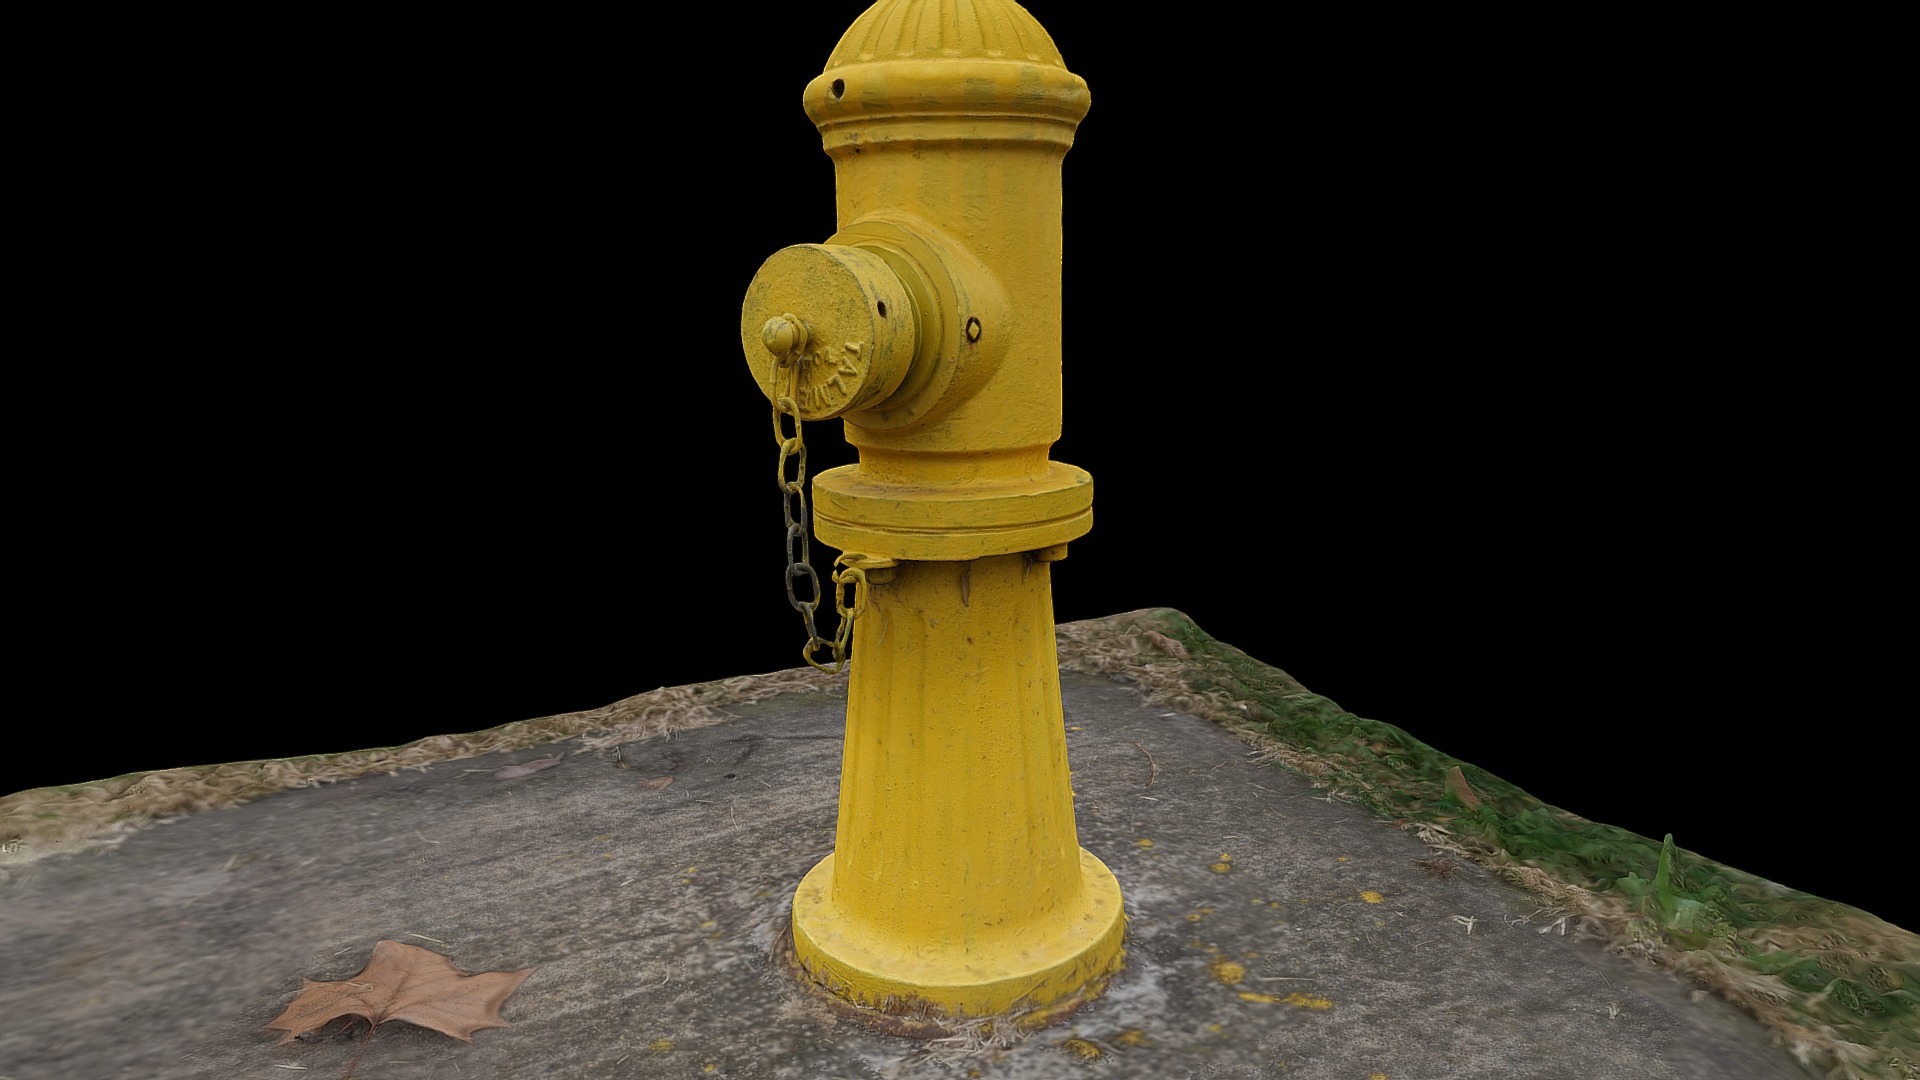 3D model 2017-06 – Santiago – Fire Hydrant 1 - This is a 3D model of the 2017-06 - Santiago - Fire Hydrant 1. The 3D model is about a yellow fire hydrant.